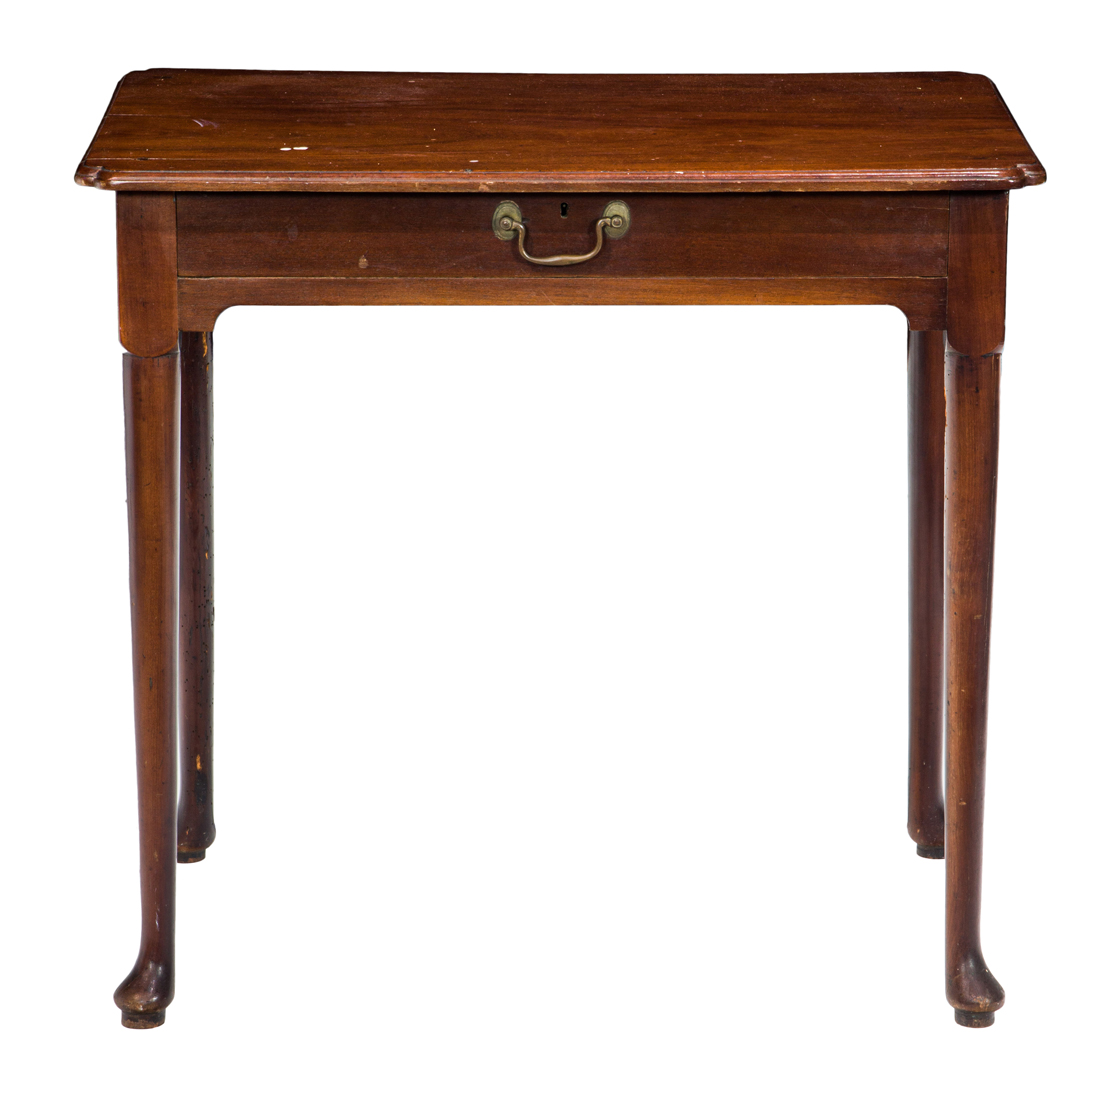 A QUEEN ANNE STYLE MAHOGANY SIDE